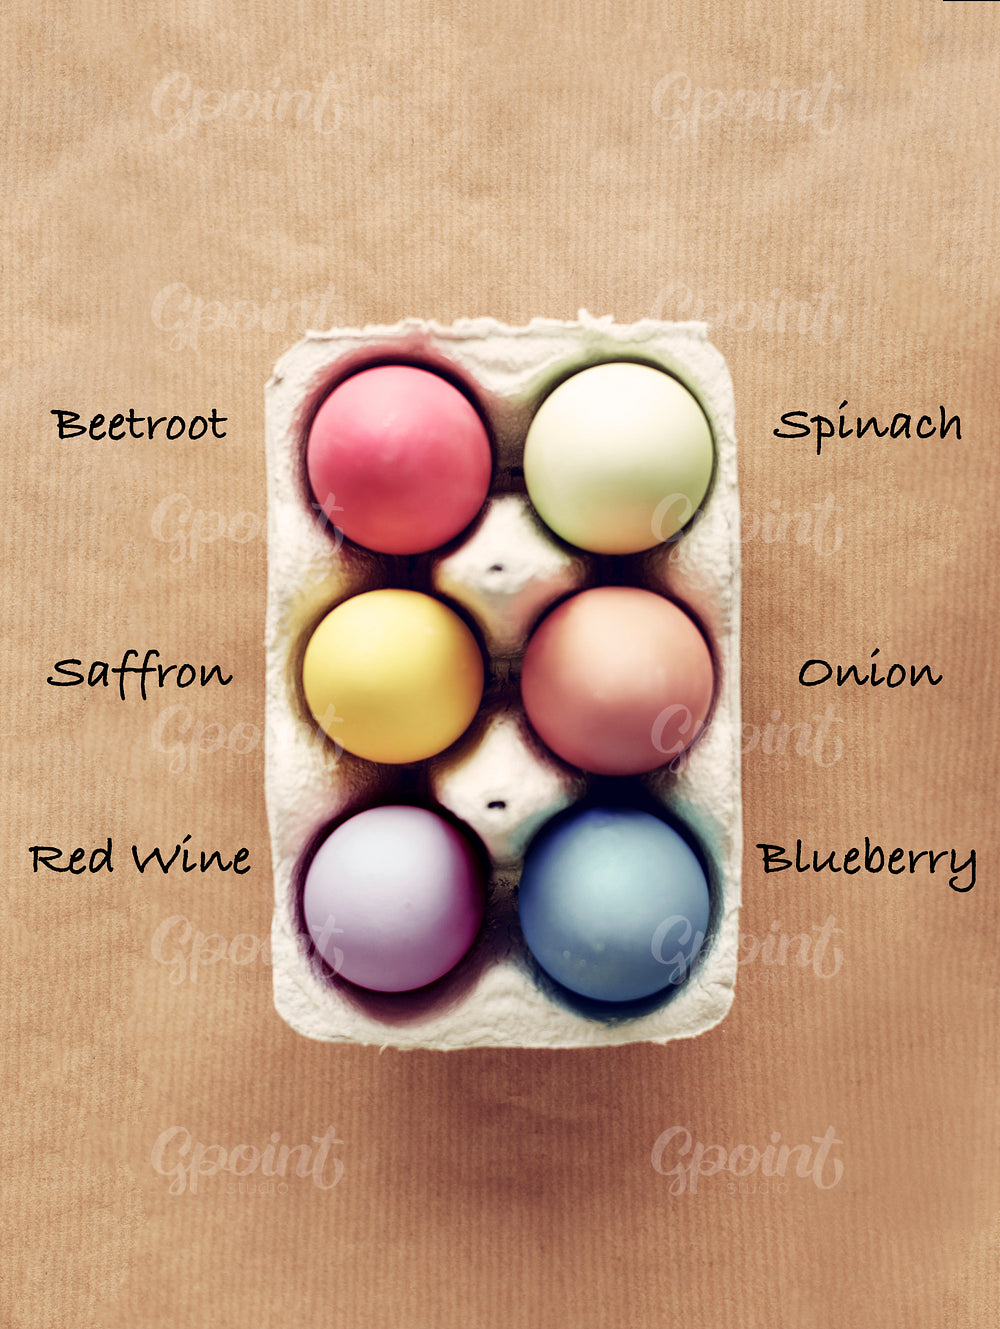 Homemade dyed Easter eggs with six organic colors